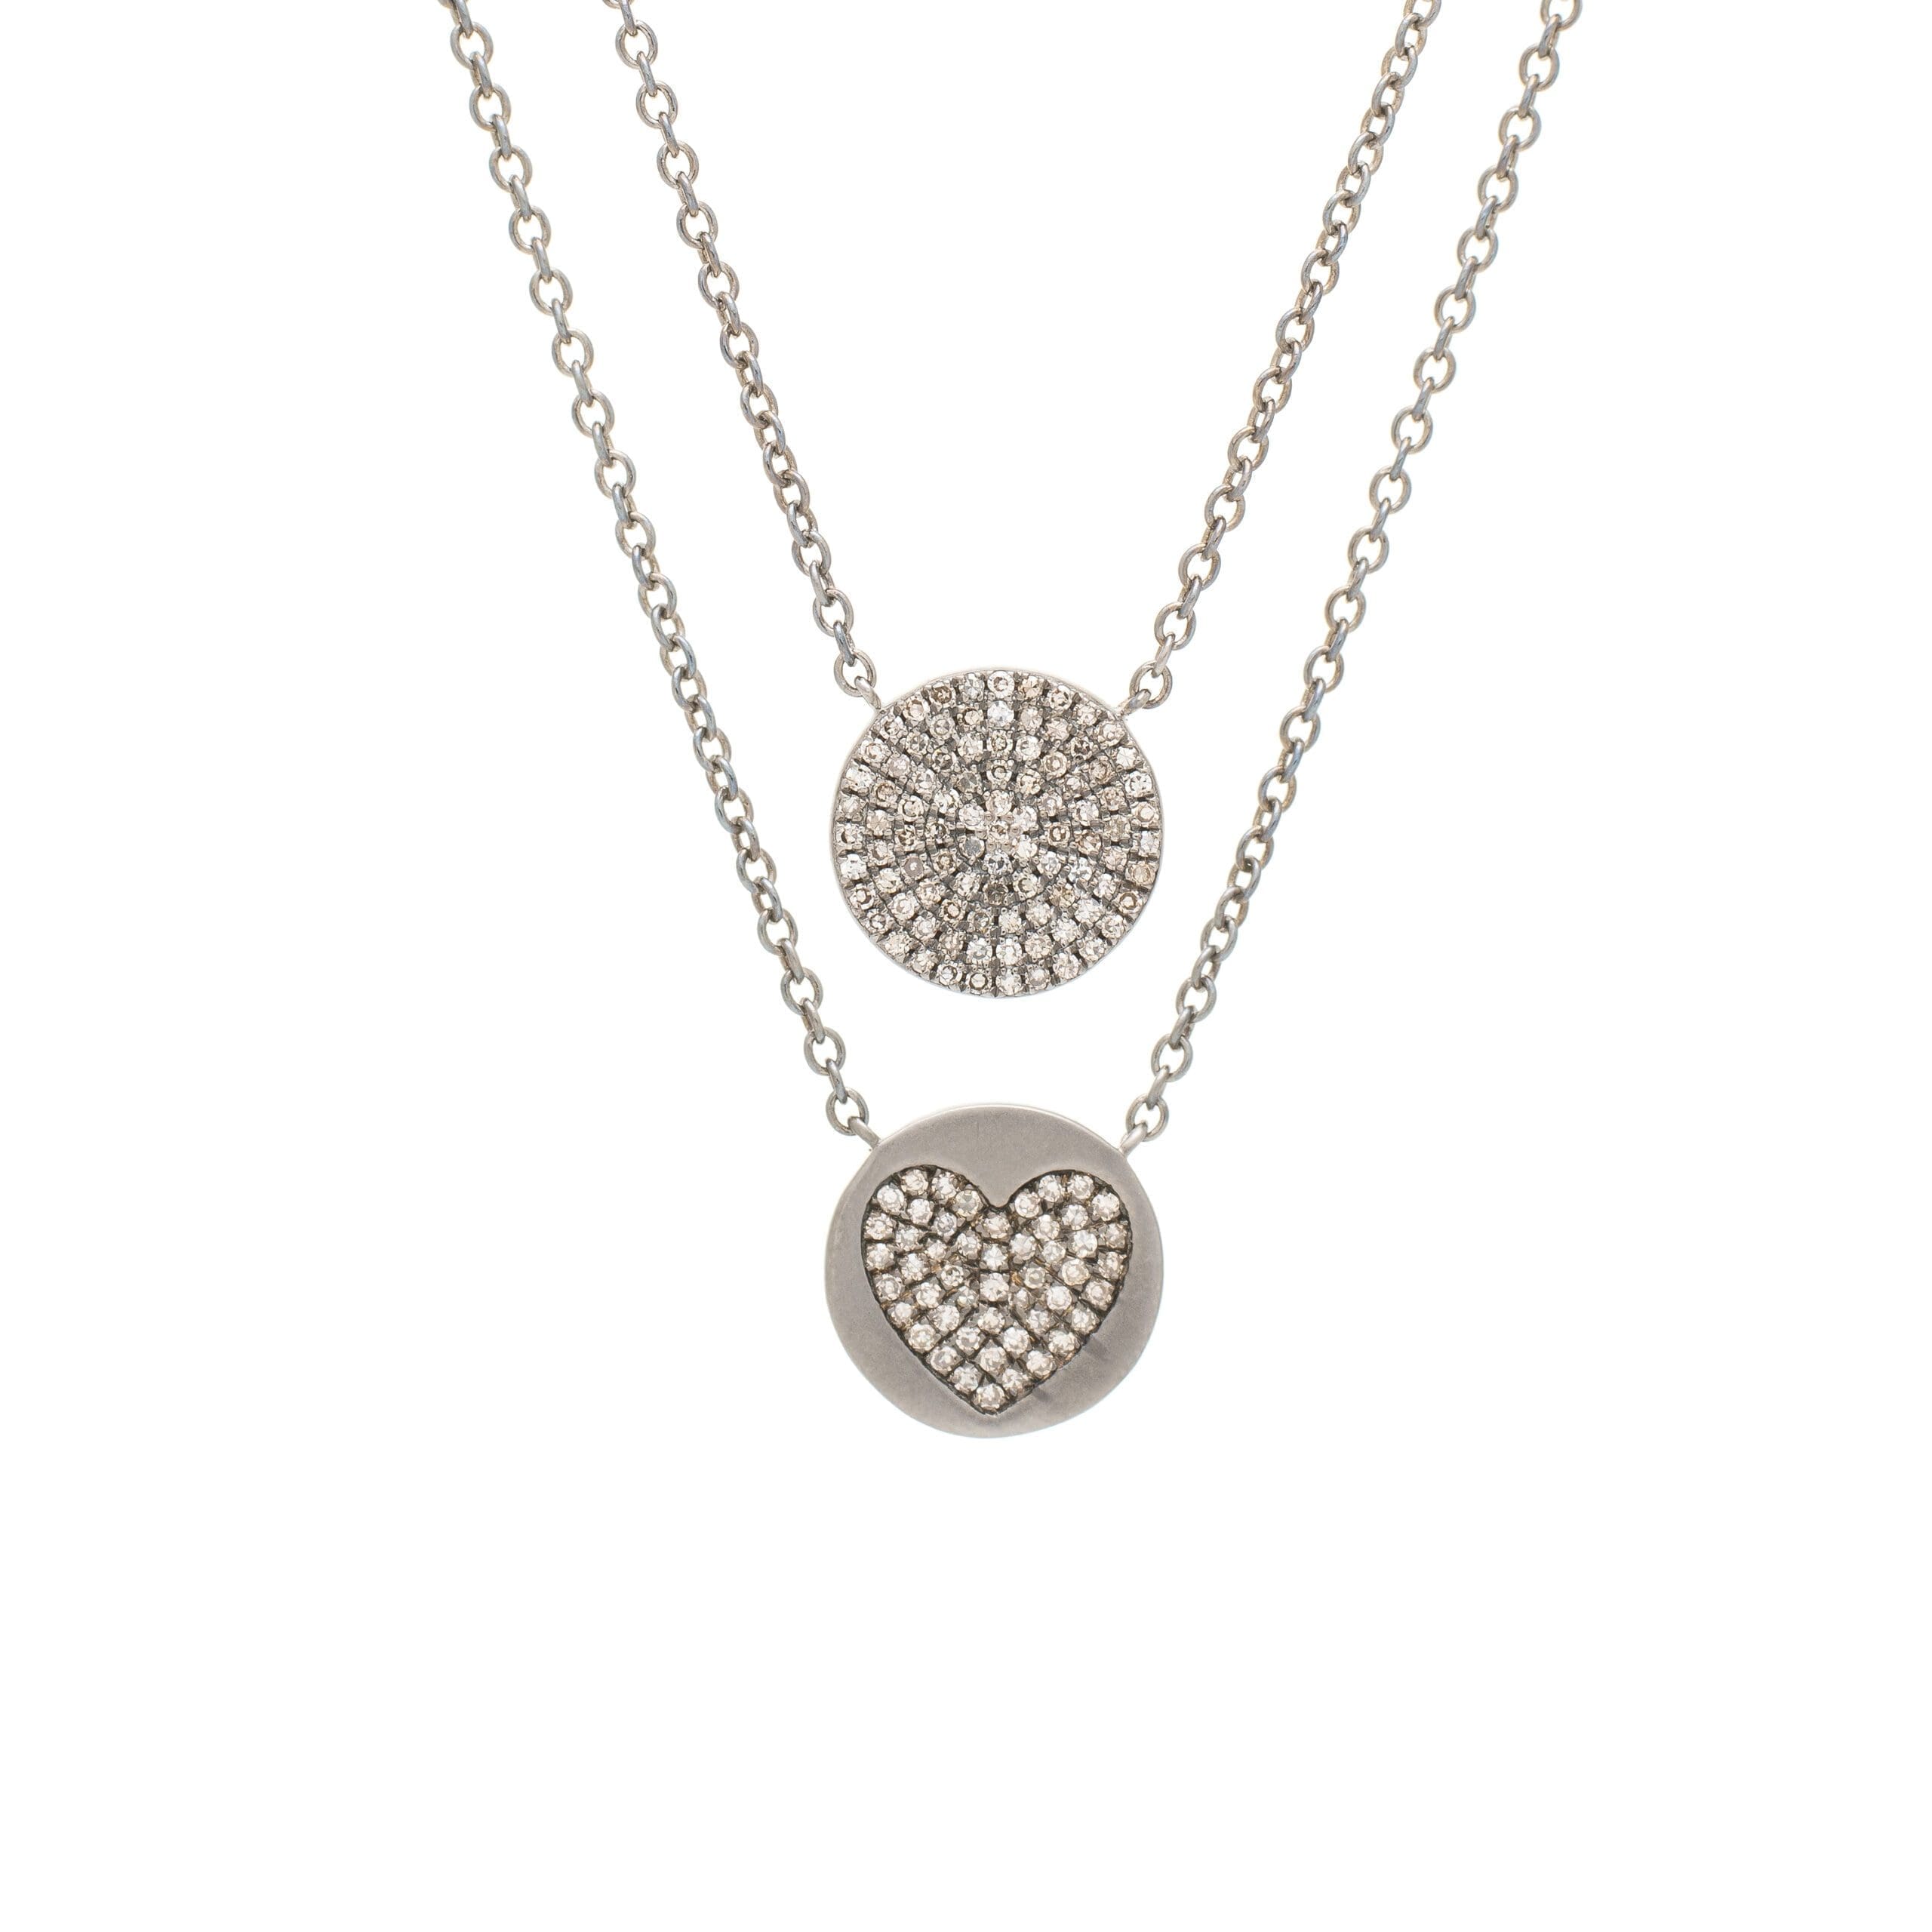 2-Sided Diamond Heart Disc Necklace Sterling Silver